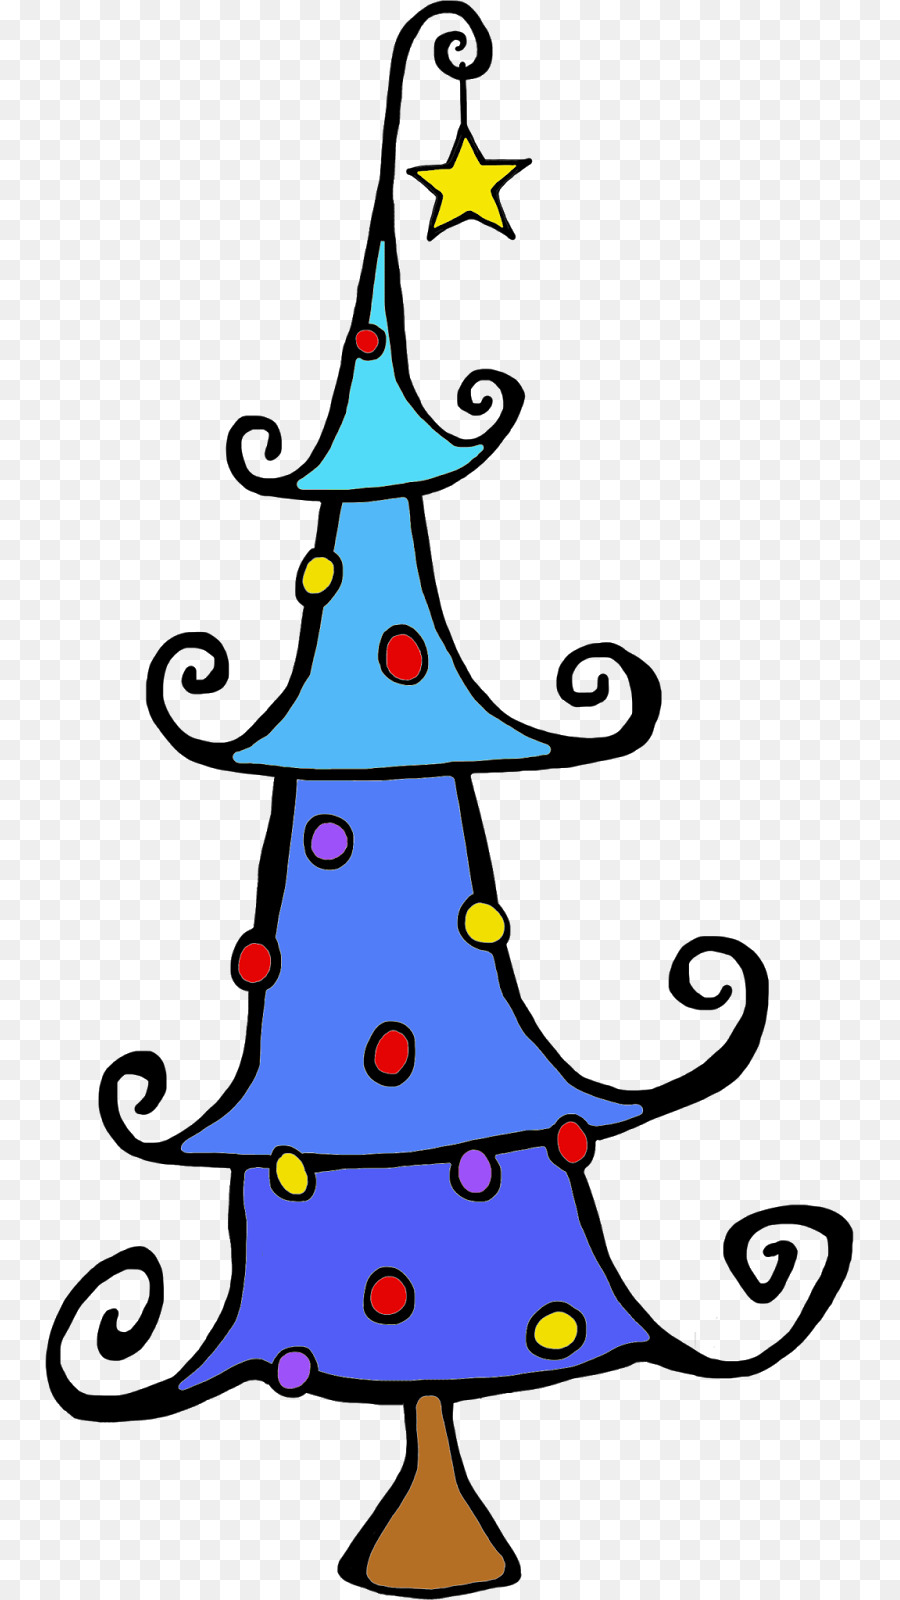 Christmas tree Clip art Christmas ornament Christmas Day - winter tutorial png download - 809*1600 - Free Transparent Christmas Tree png Download.